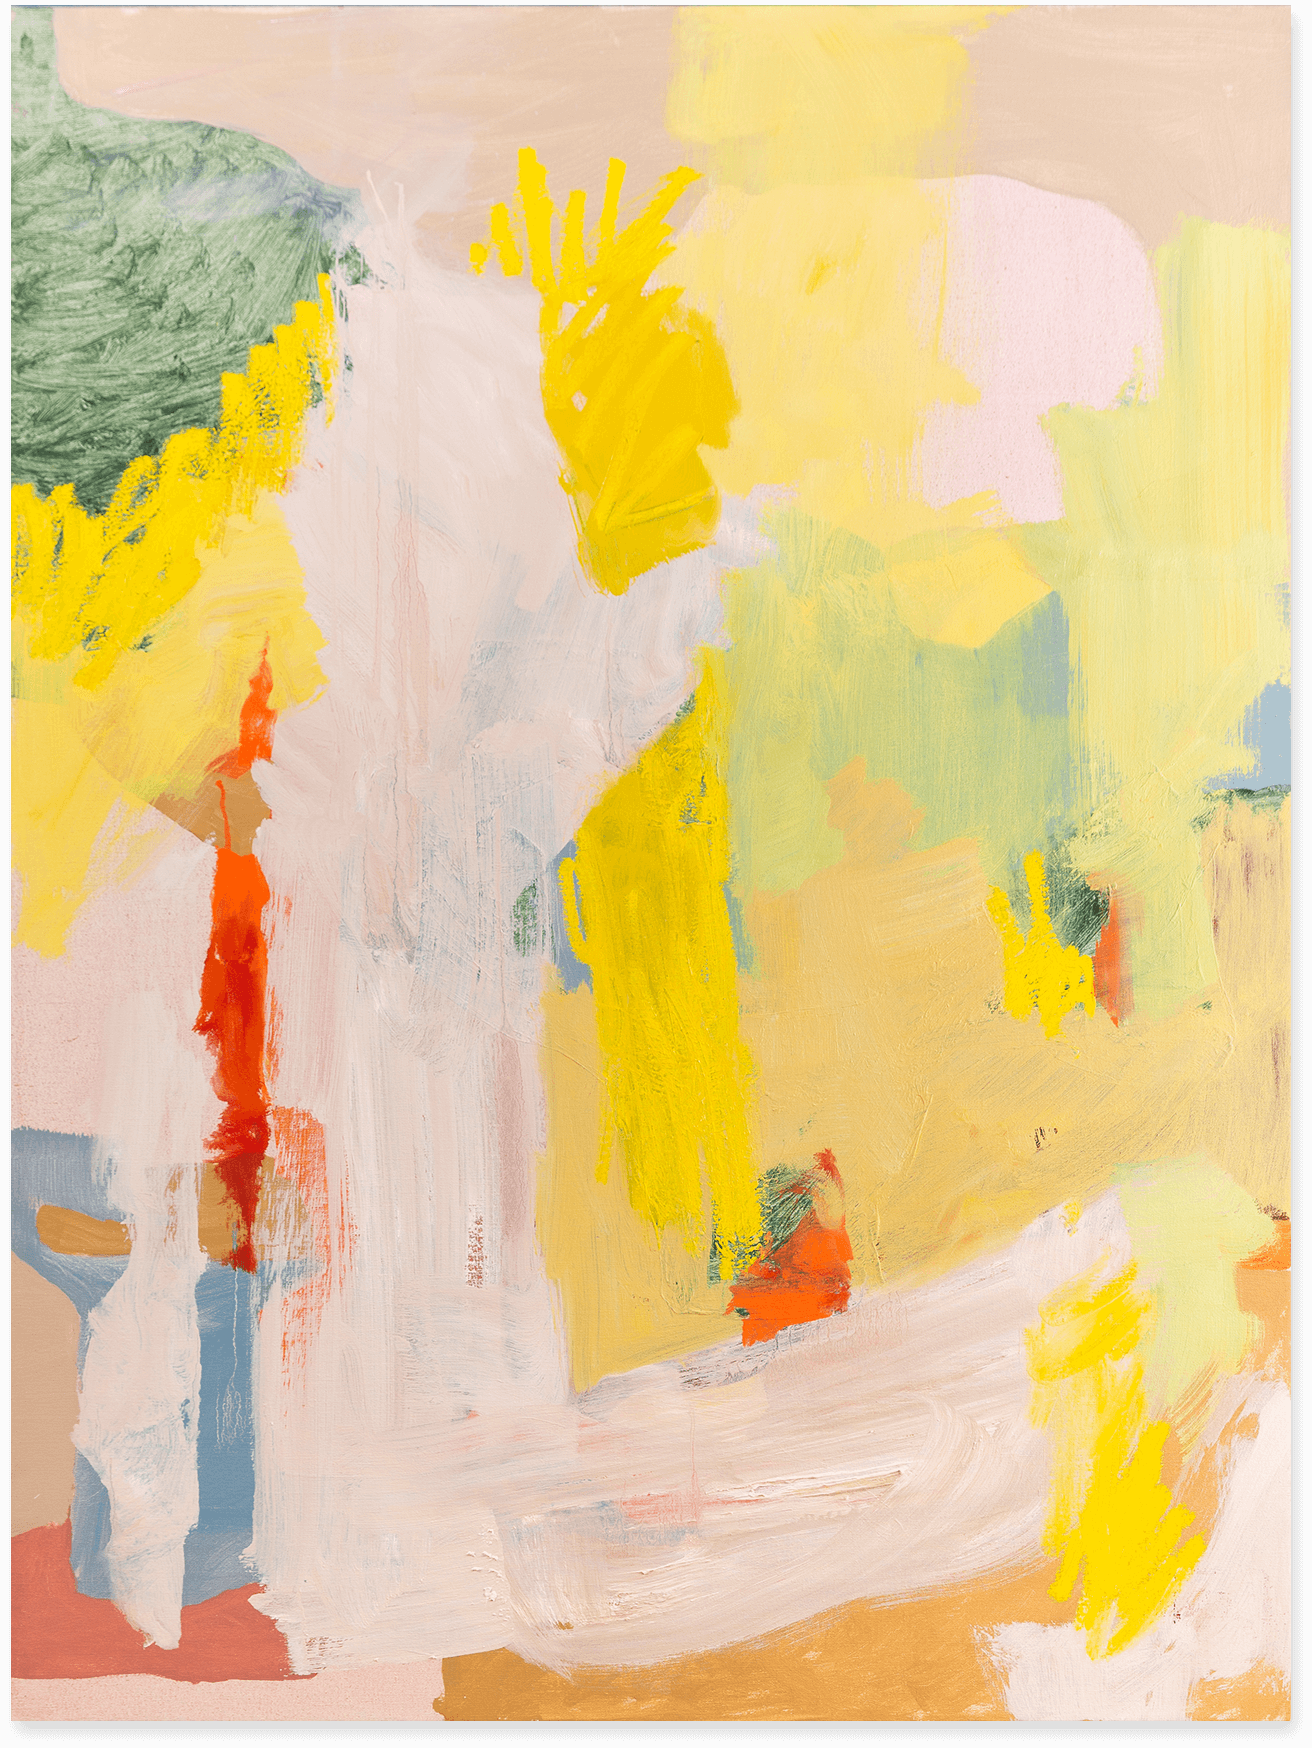 An abstract oil painting in ochre, yellow, white and green